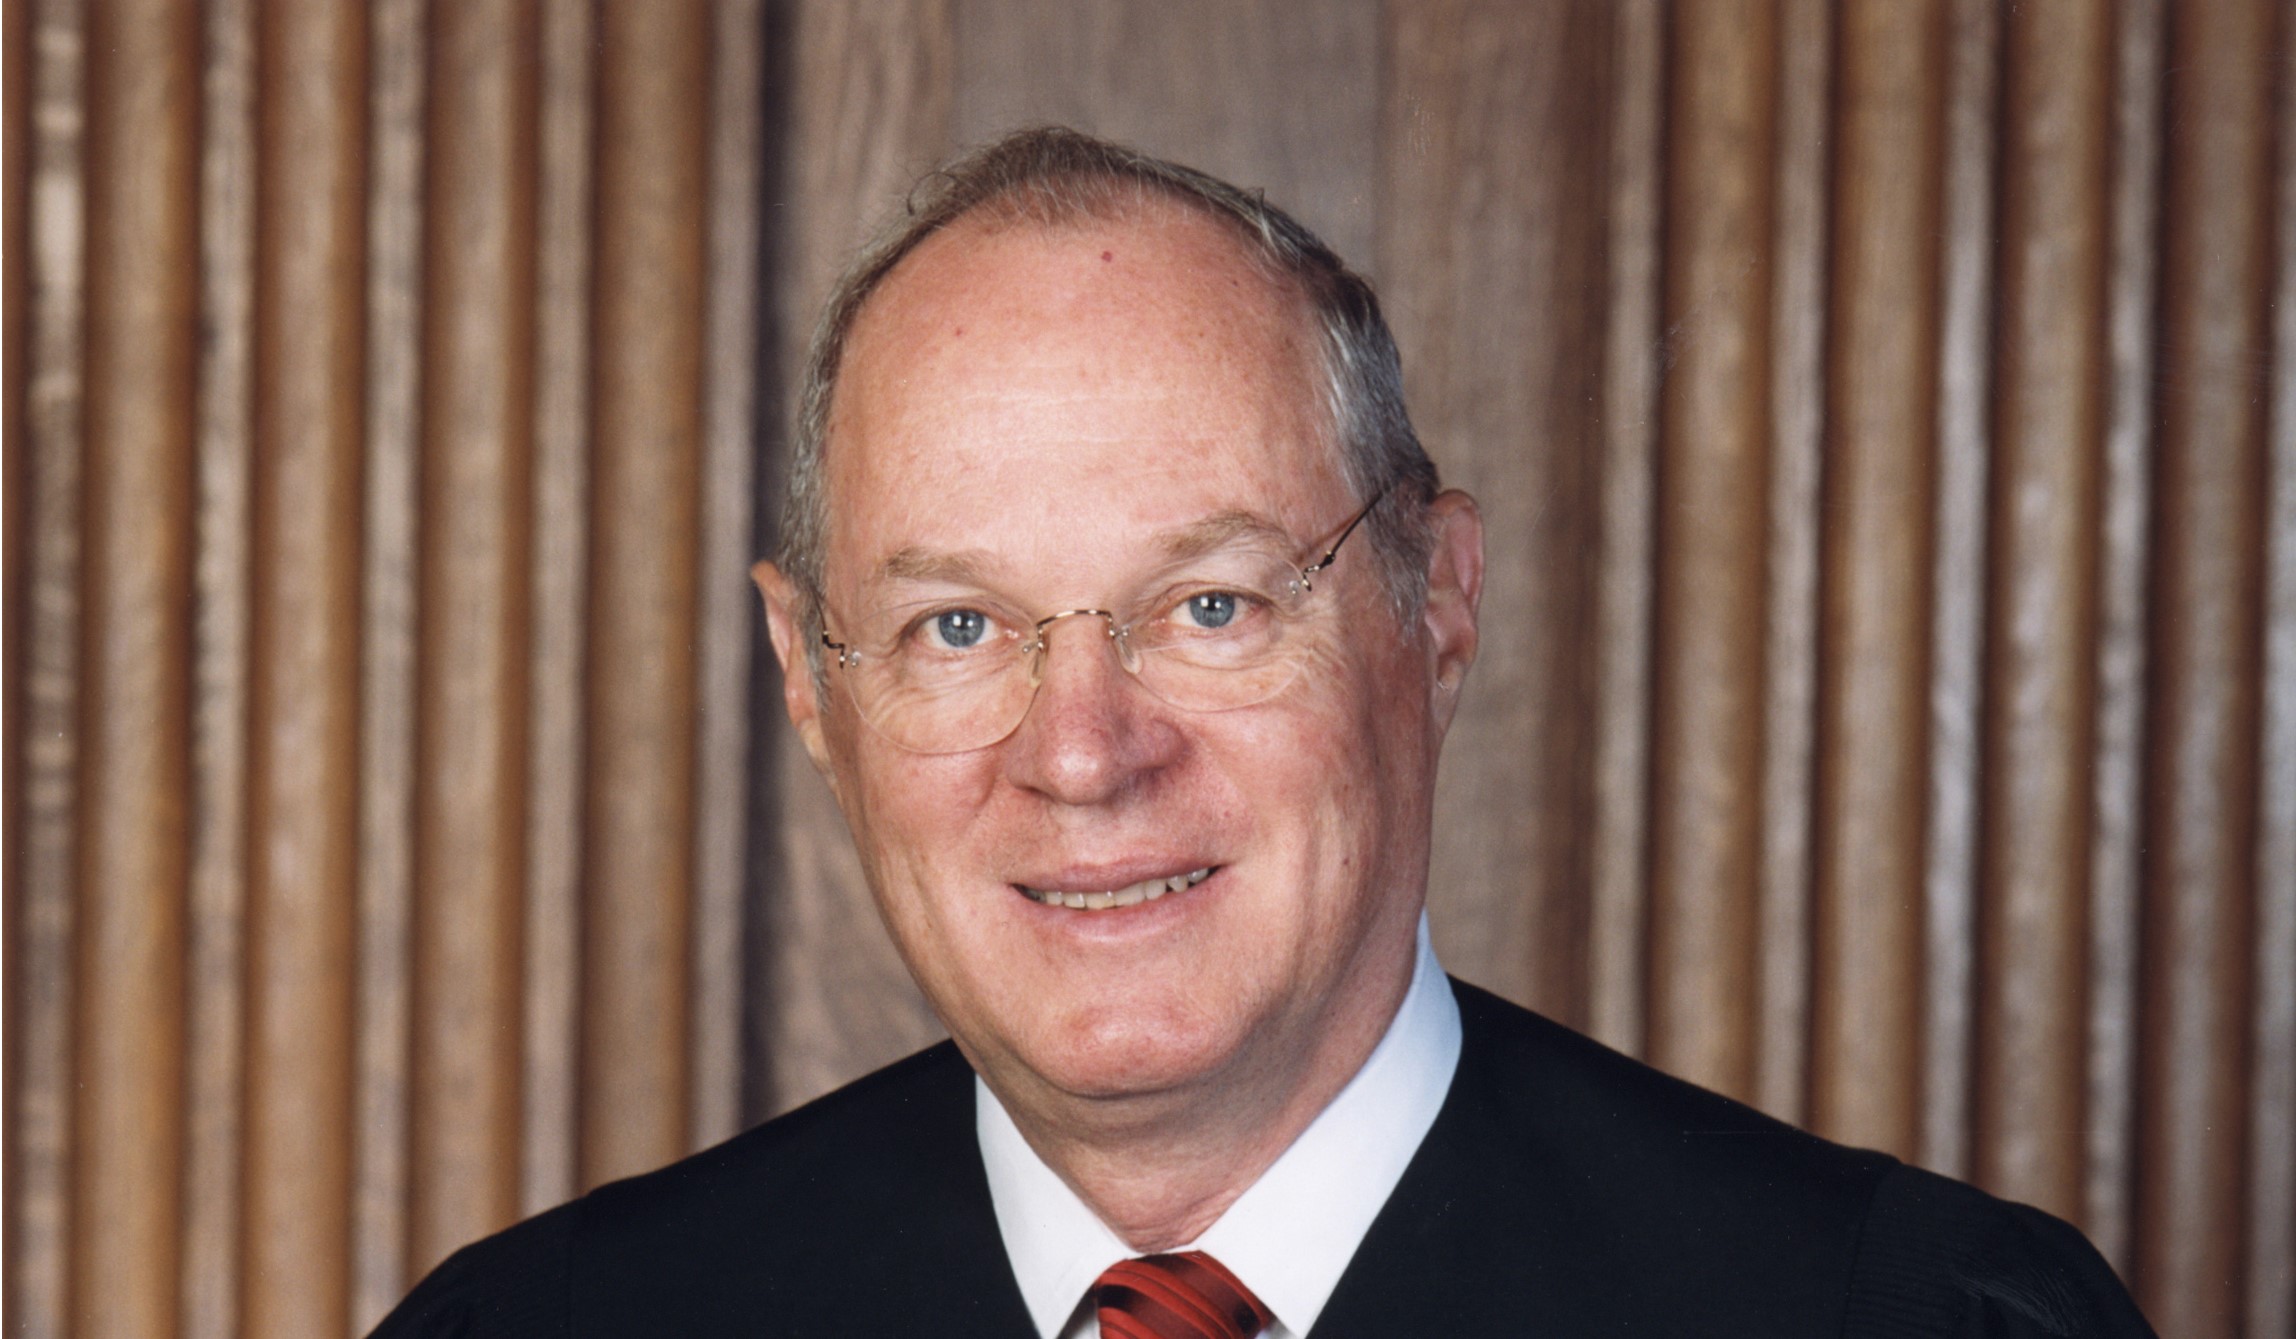 Justice Kennedy to retire from Supreme Court